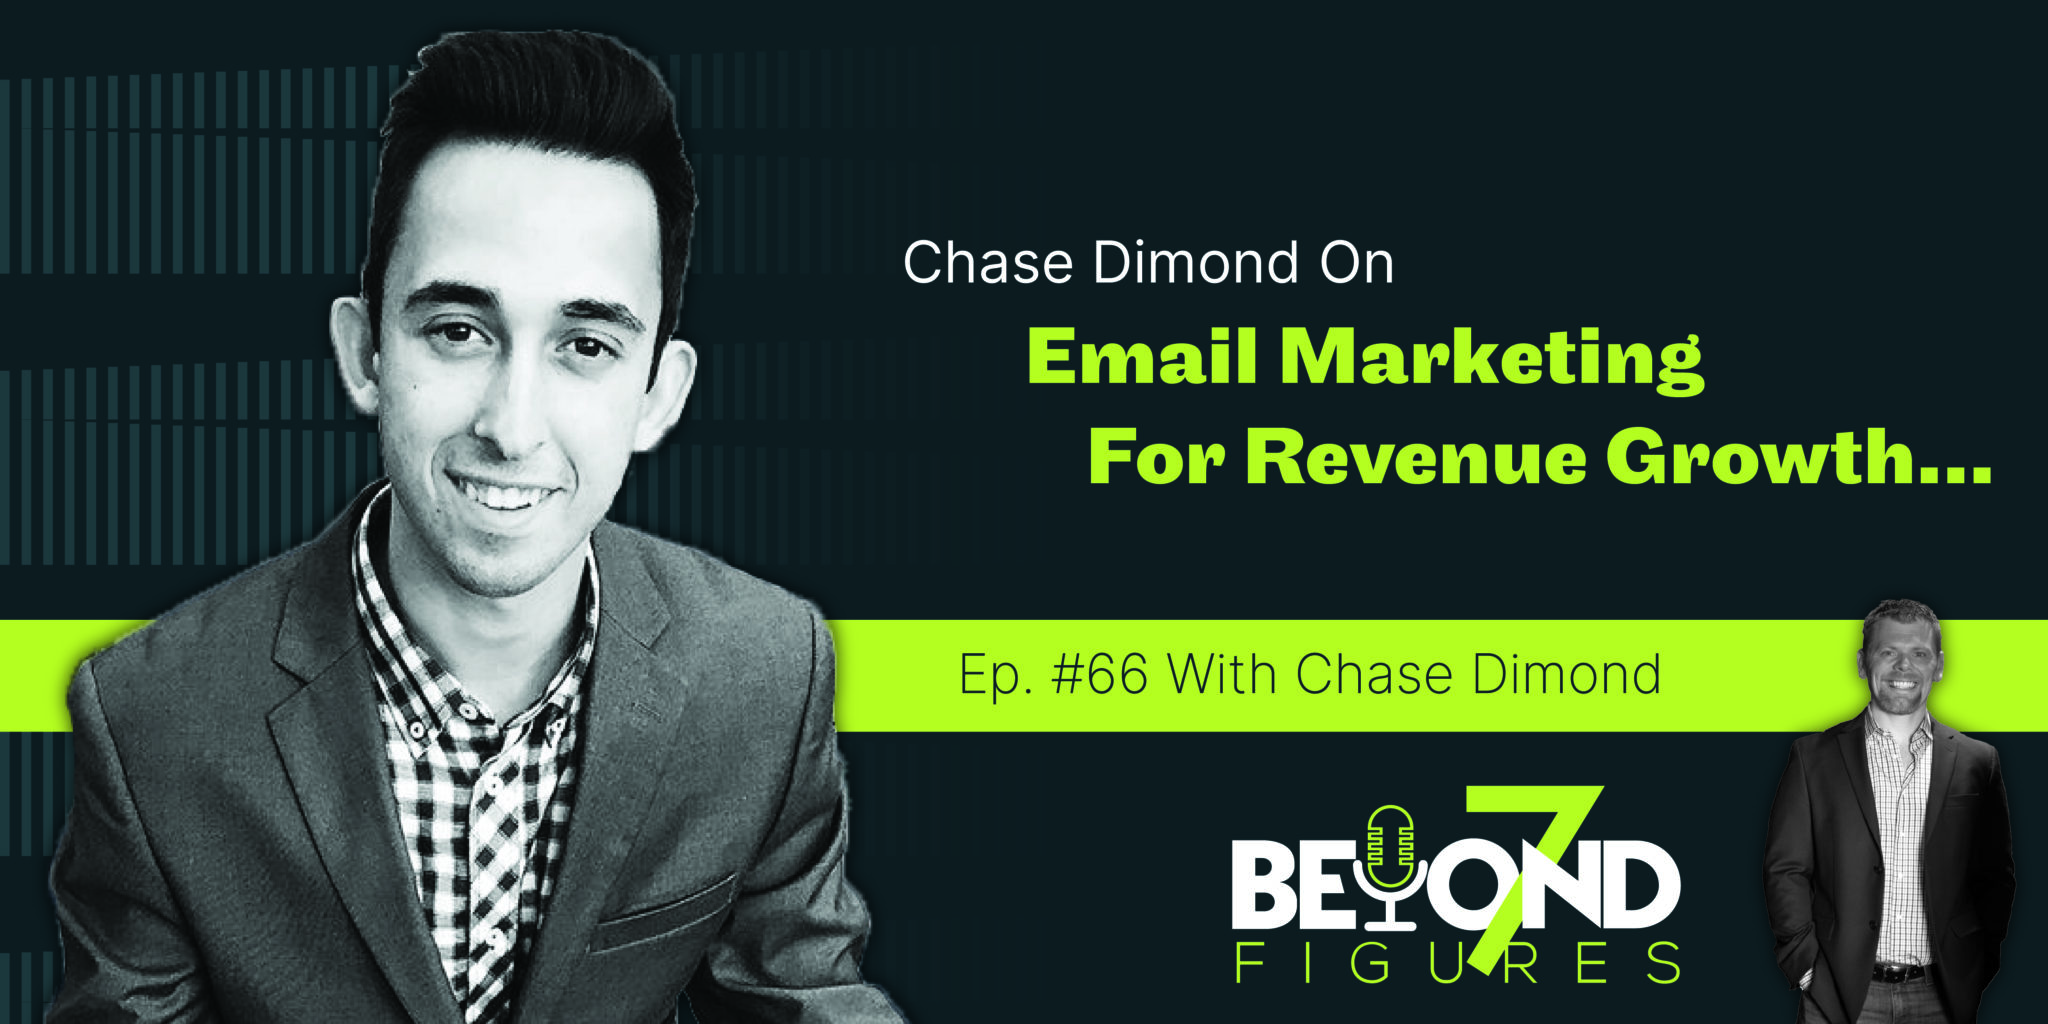 "Chase Dimond on Email Marketing for Revenue Growth" (Podcast)